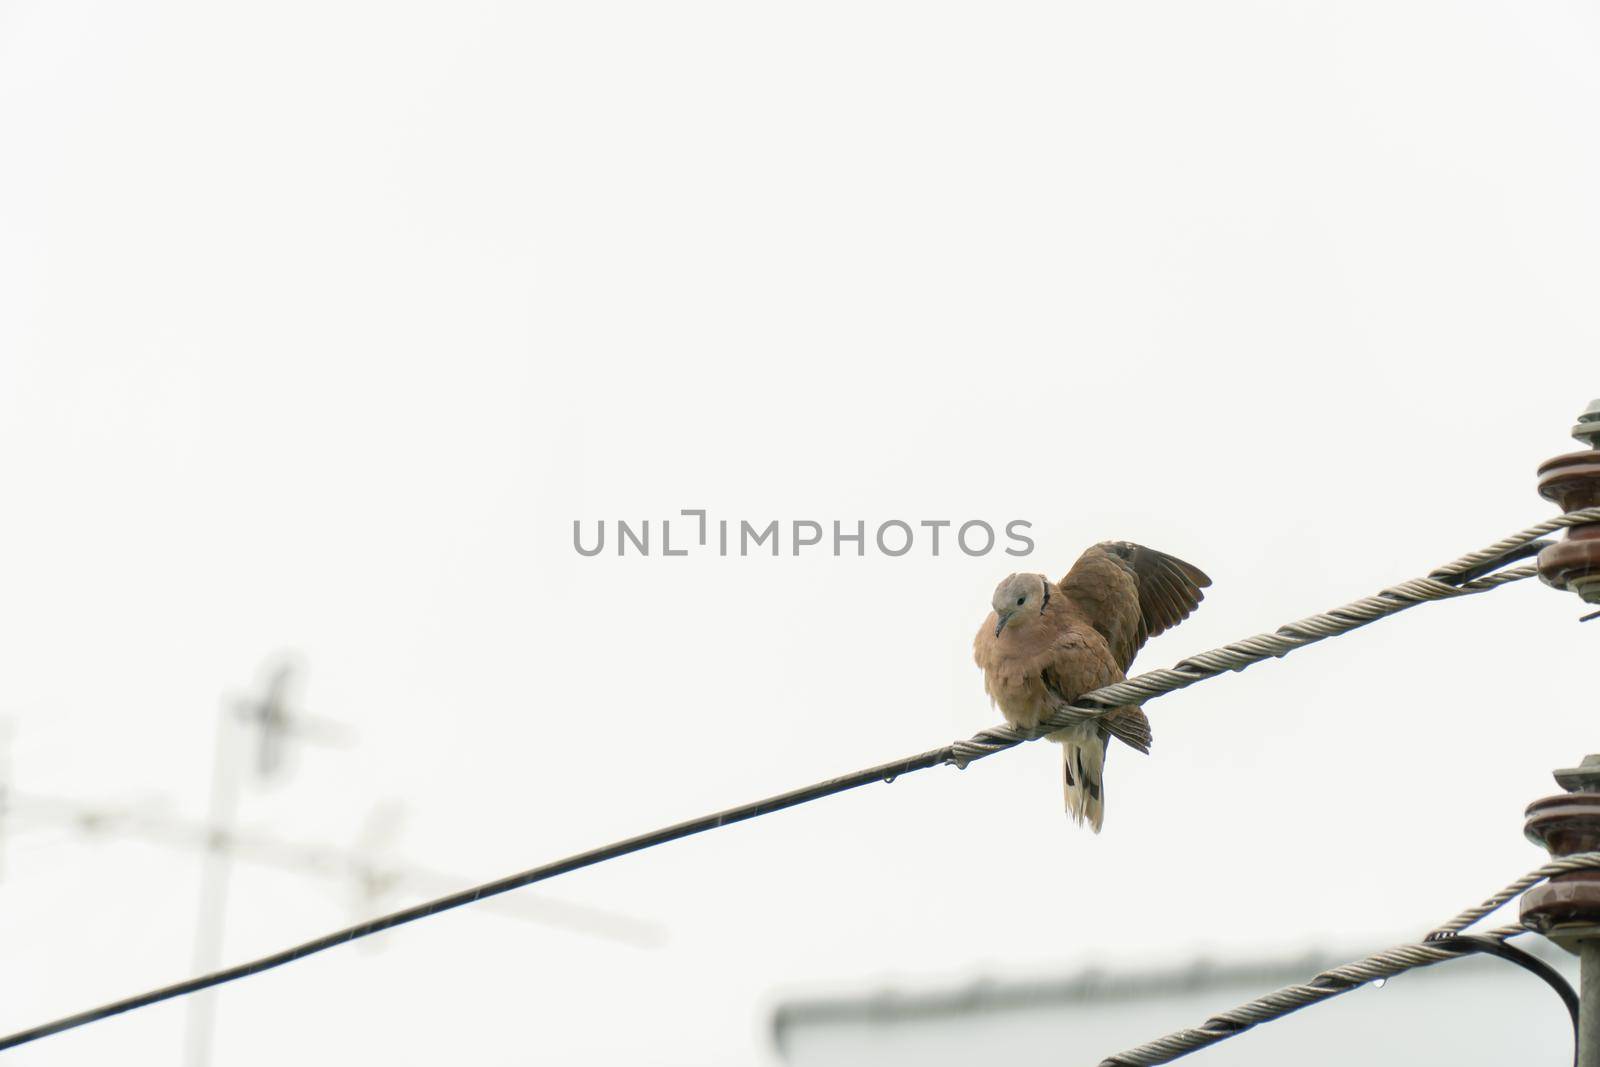 The dove in the city perched on the power line to dry its wings after the rain. by chiawth